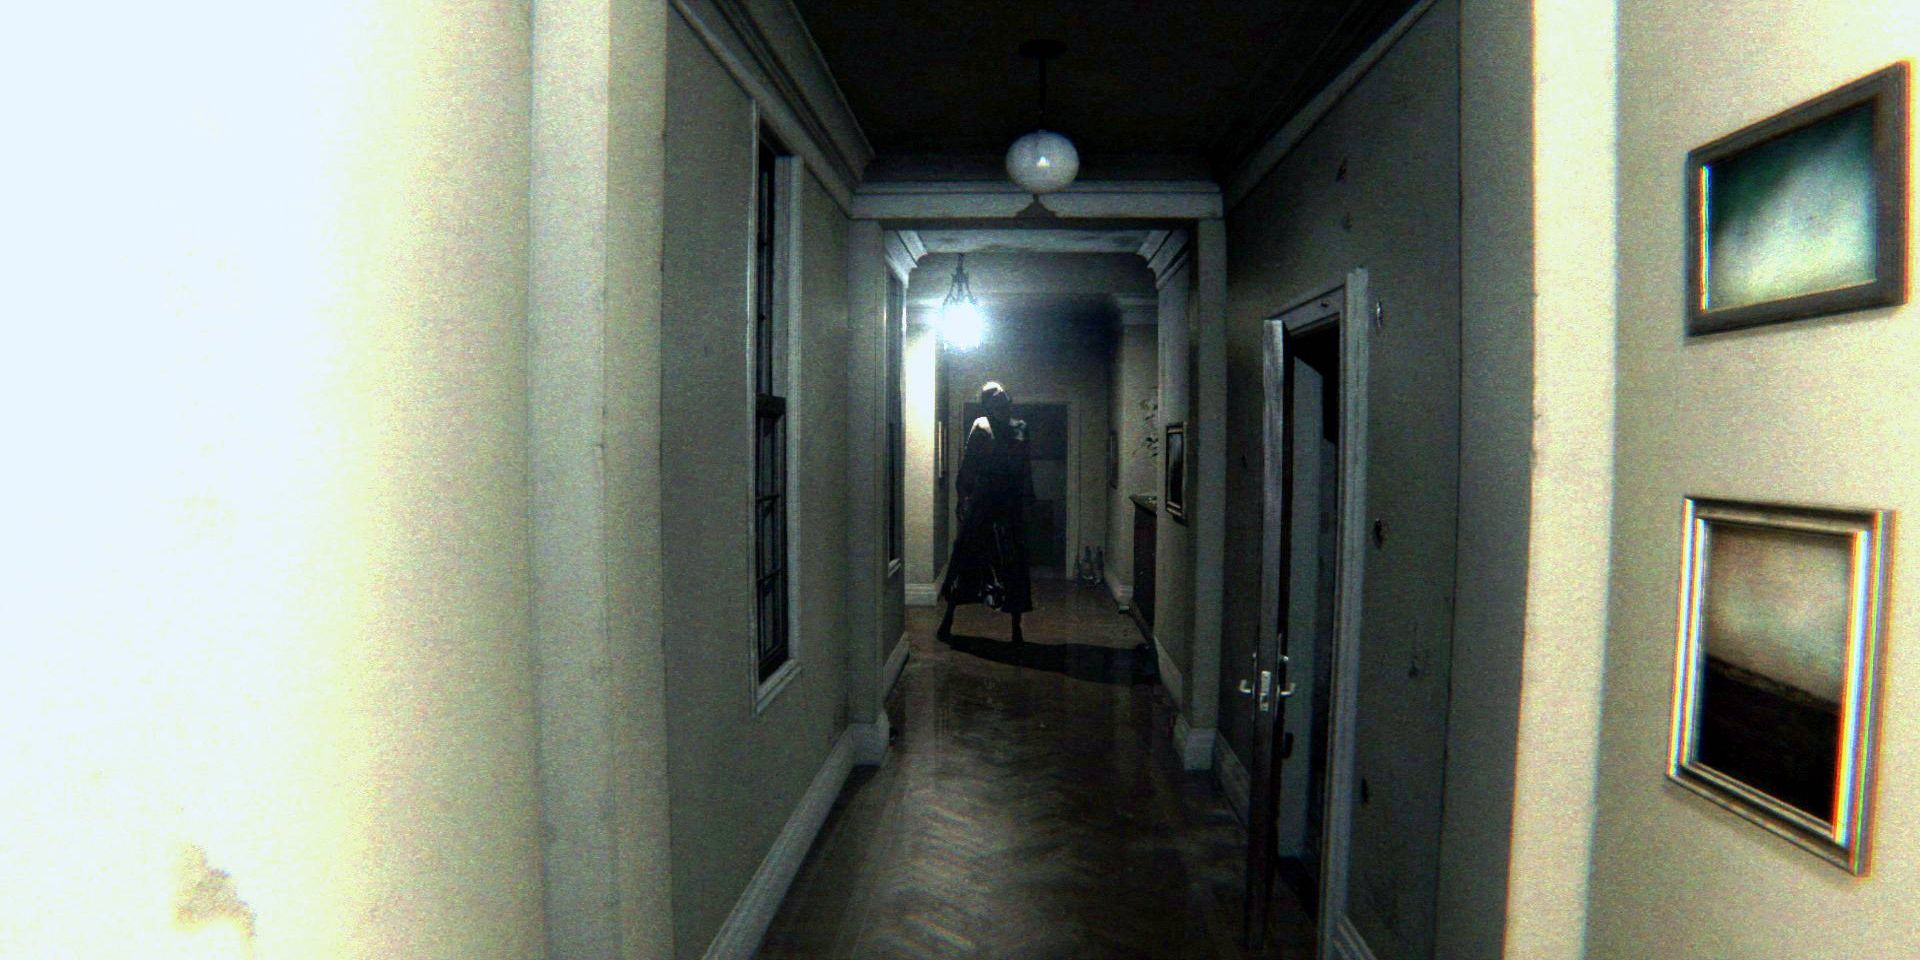 A screenshot from the horror game demo Silent Hill P.T.